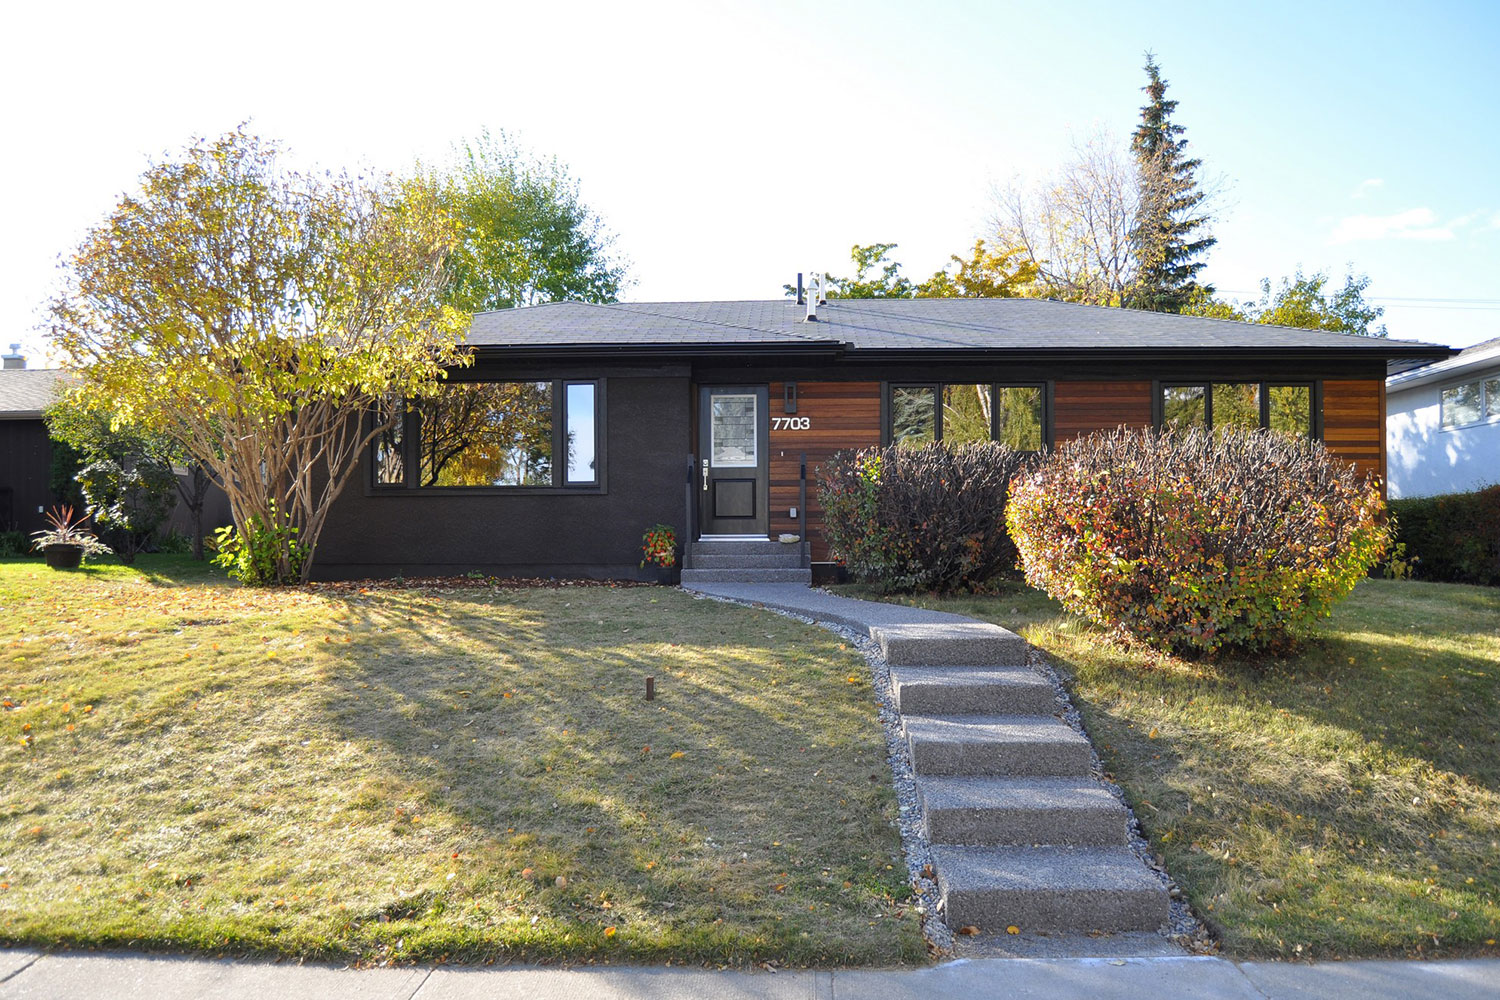 This house in Kingsland, one of Calgary’s middle-ring neighbourhoods, was completely stripped and rebuilt by Corefront Custom Homes & Renovations over a seven-month period.
Courtesy Corefront Custom Homes & Renovations